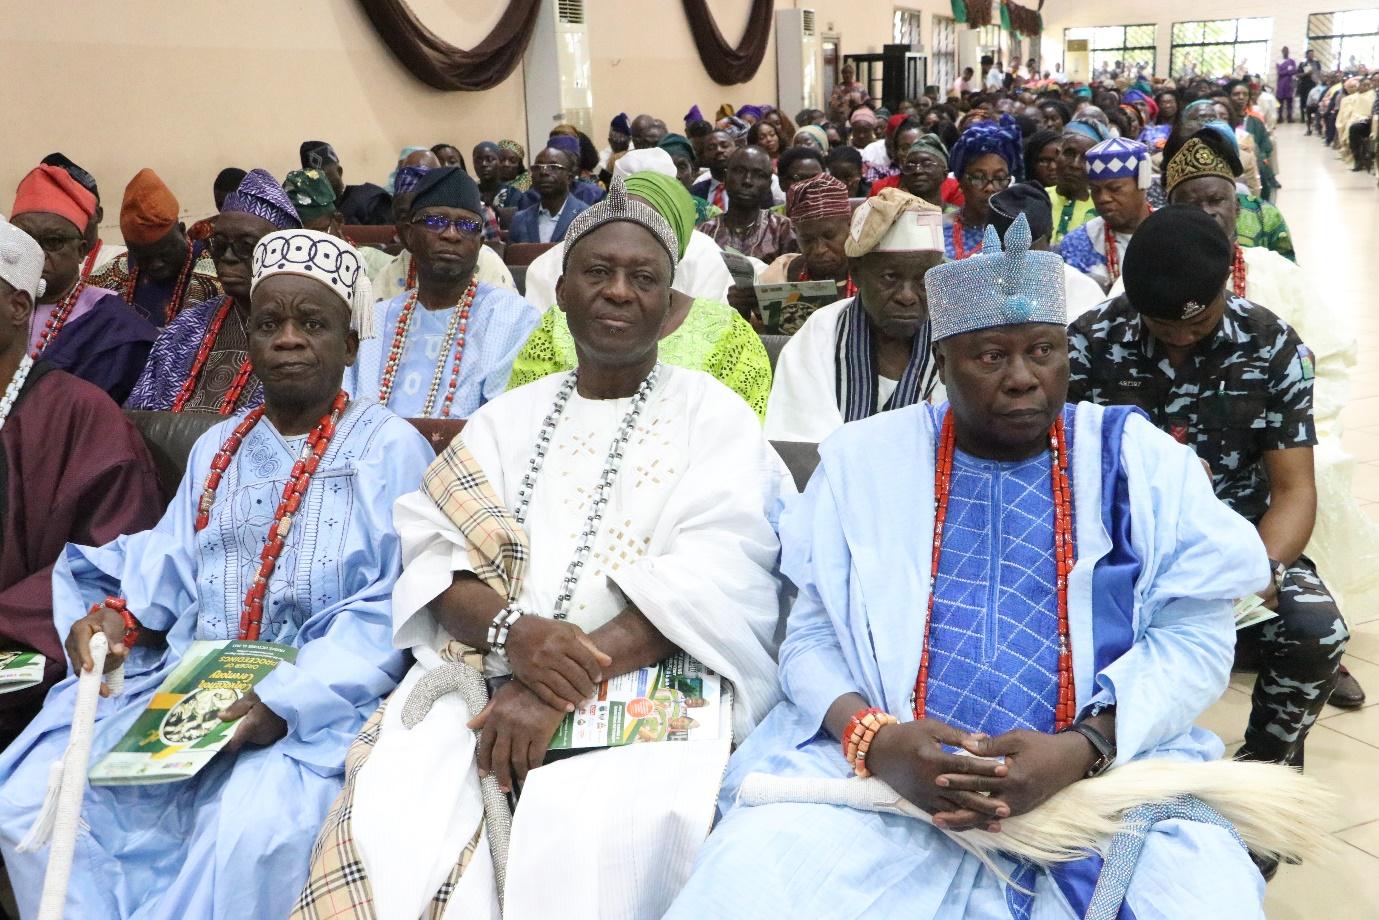 C:\Users\USER\Downloads\A cross-section of Traditional Rulers led by the Olomu of Omu Aran, HRM Oba AbdulRaheem Adeoti Landmark University 10th Convocation ceremony.JPG